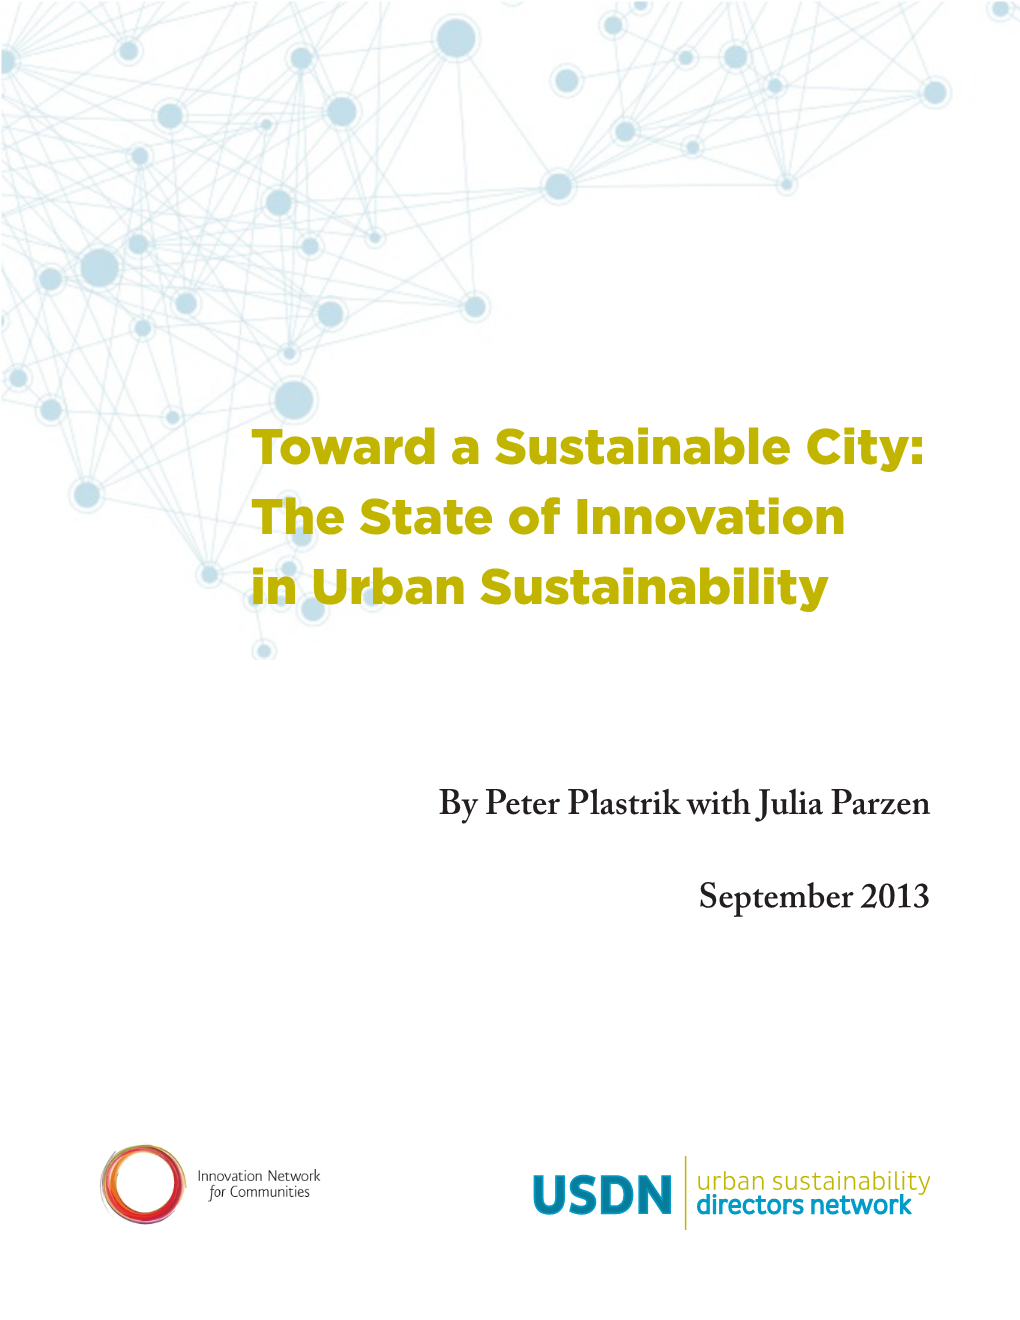 Toward a Sustainable City: the State of Innovation in Urban Sustainability